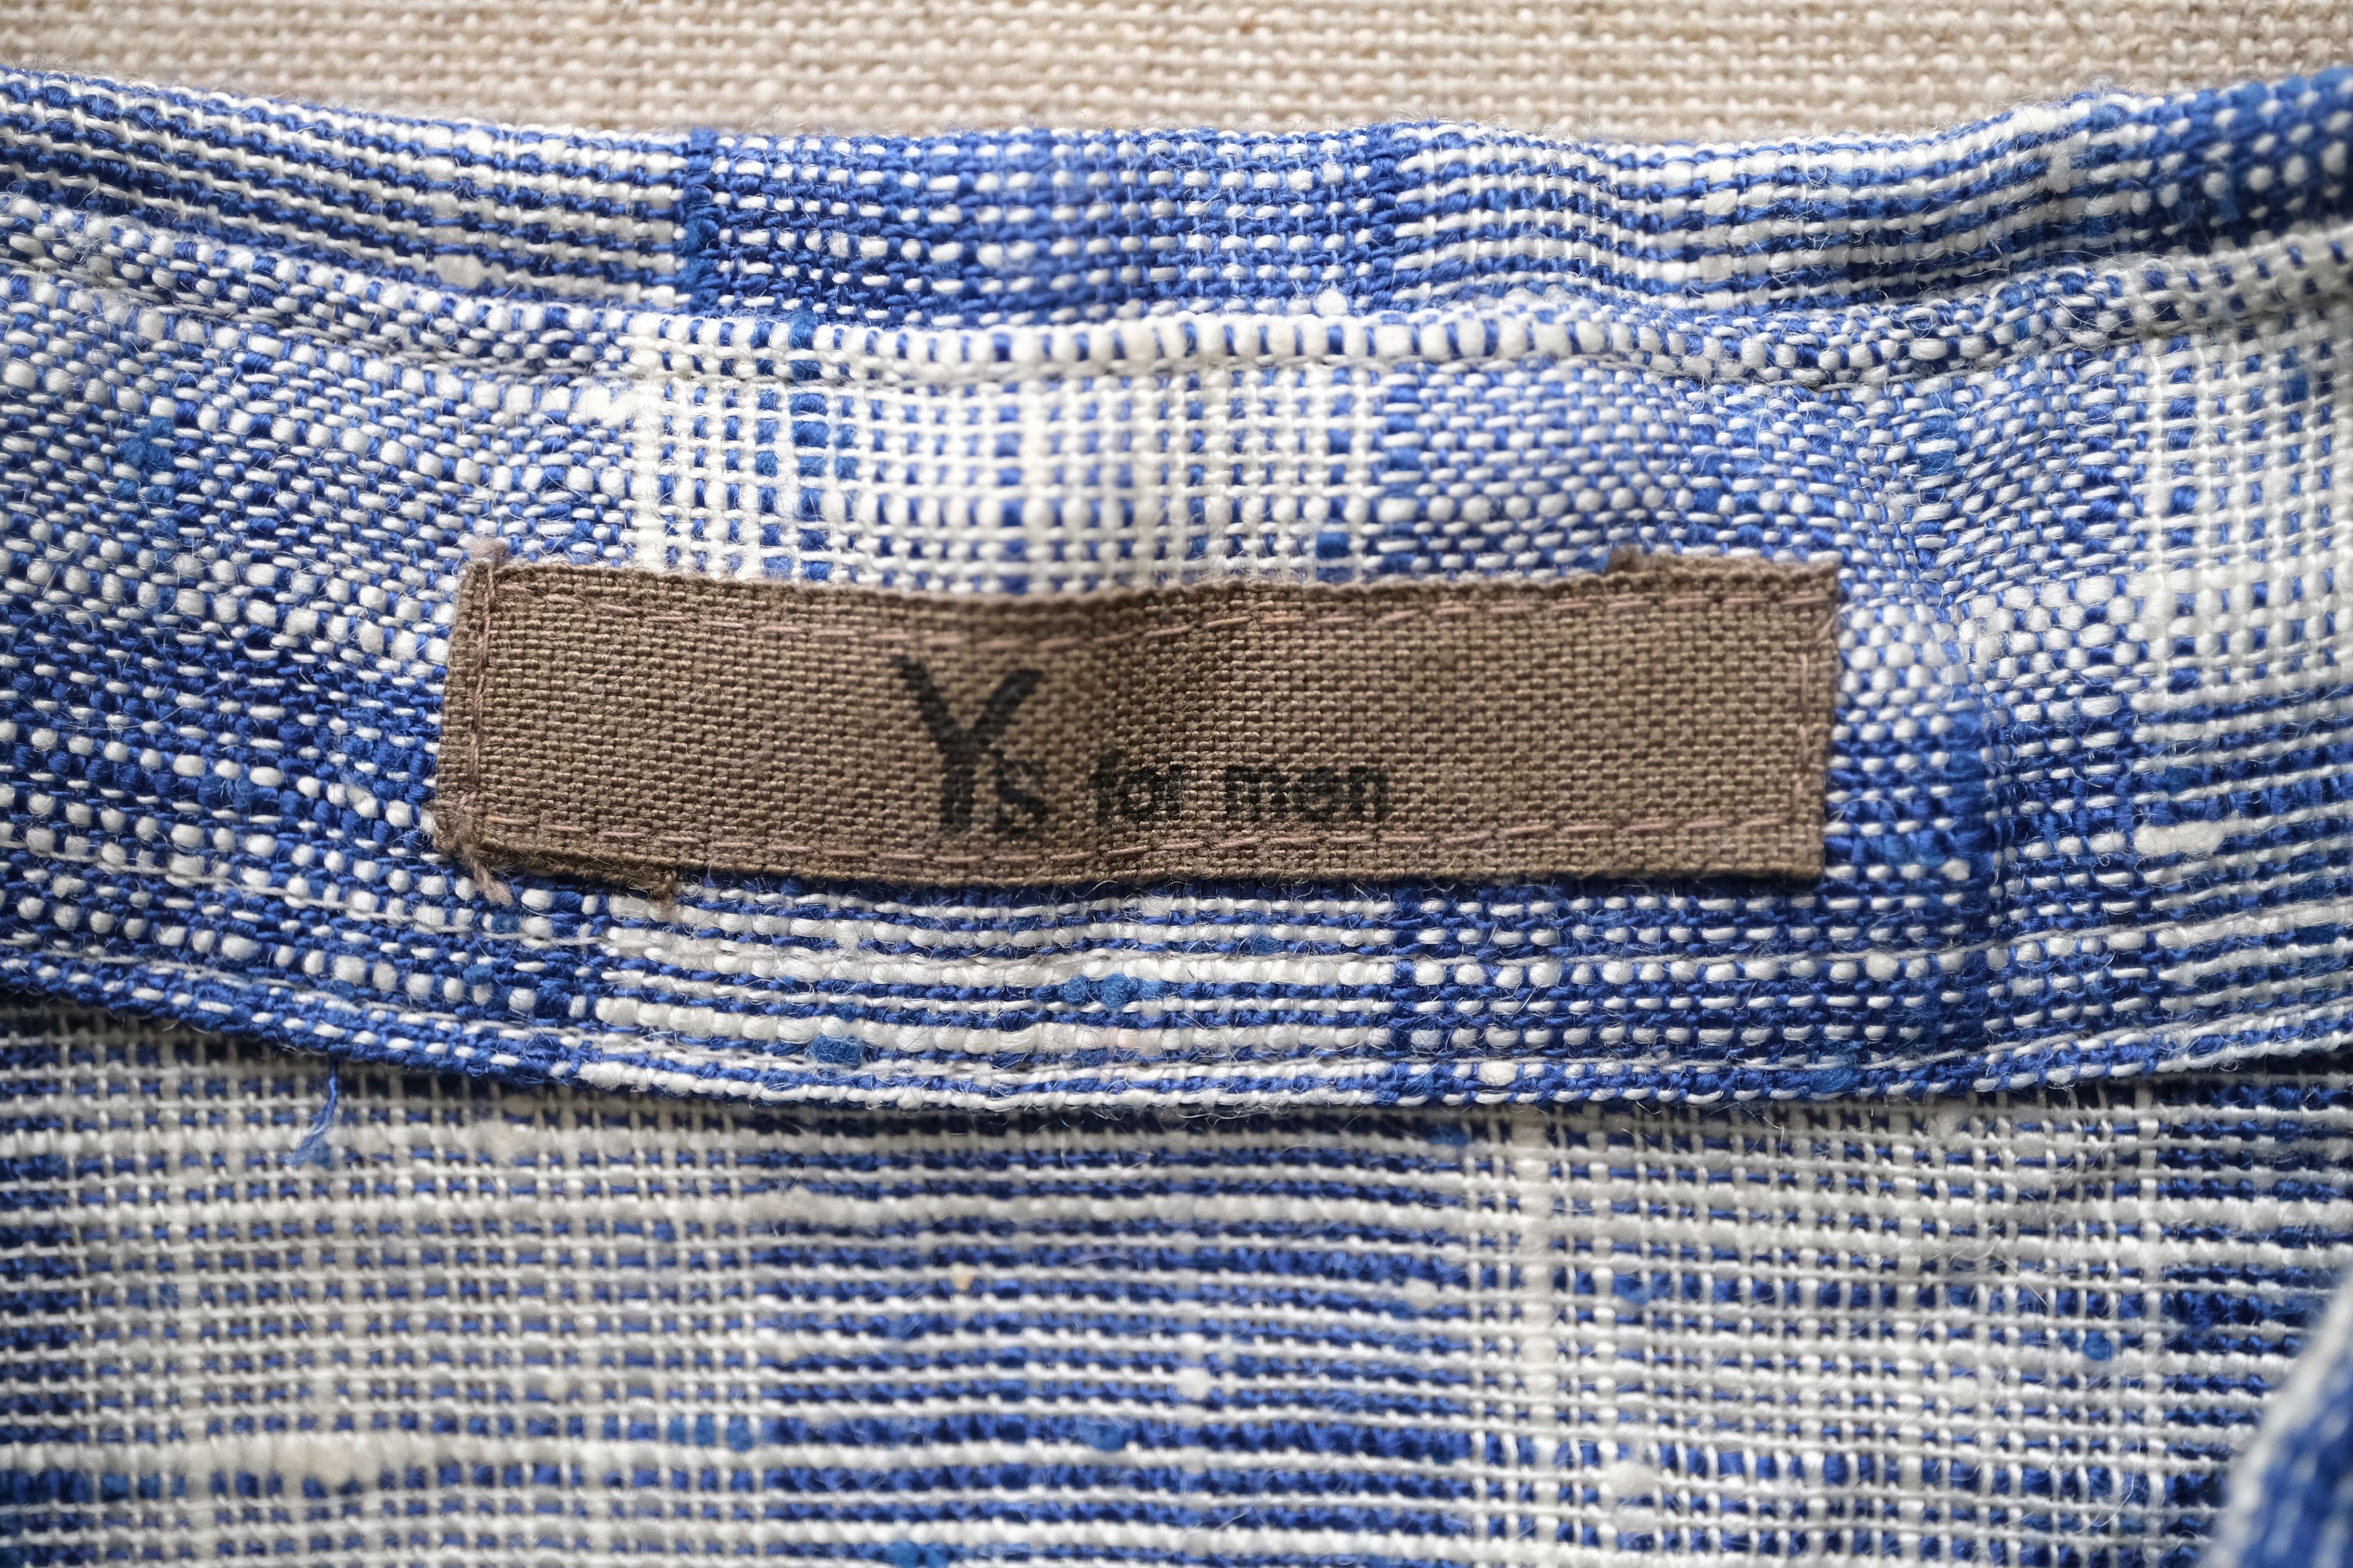 *SOLD* 🎐 YFM Archive [1970s-80s] Textured Plaid Shirt - 7